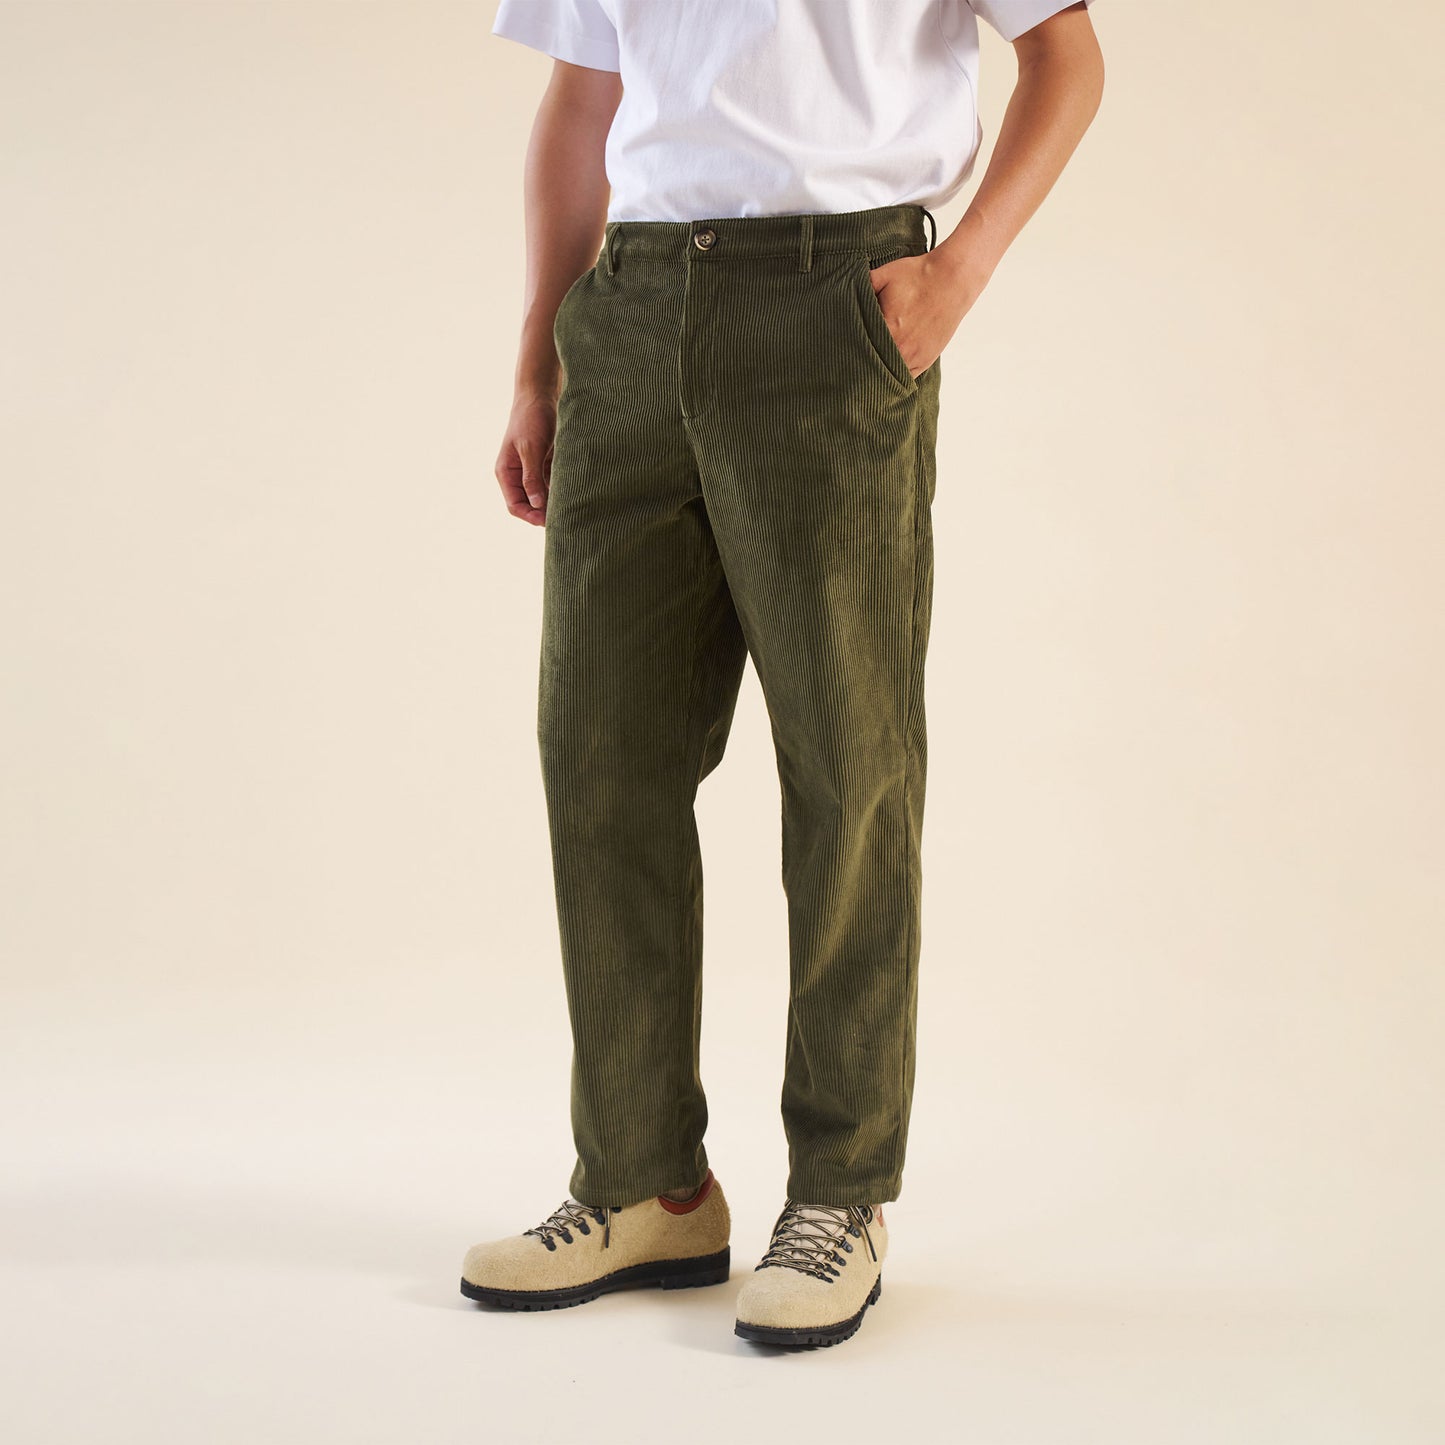 Pull-On Forest Green Corduroy Flare Pant | Winter pants outfit, Green pants  outfit, Flare pants